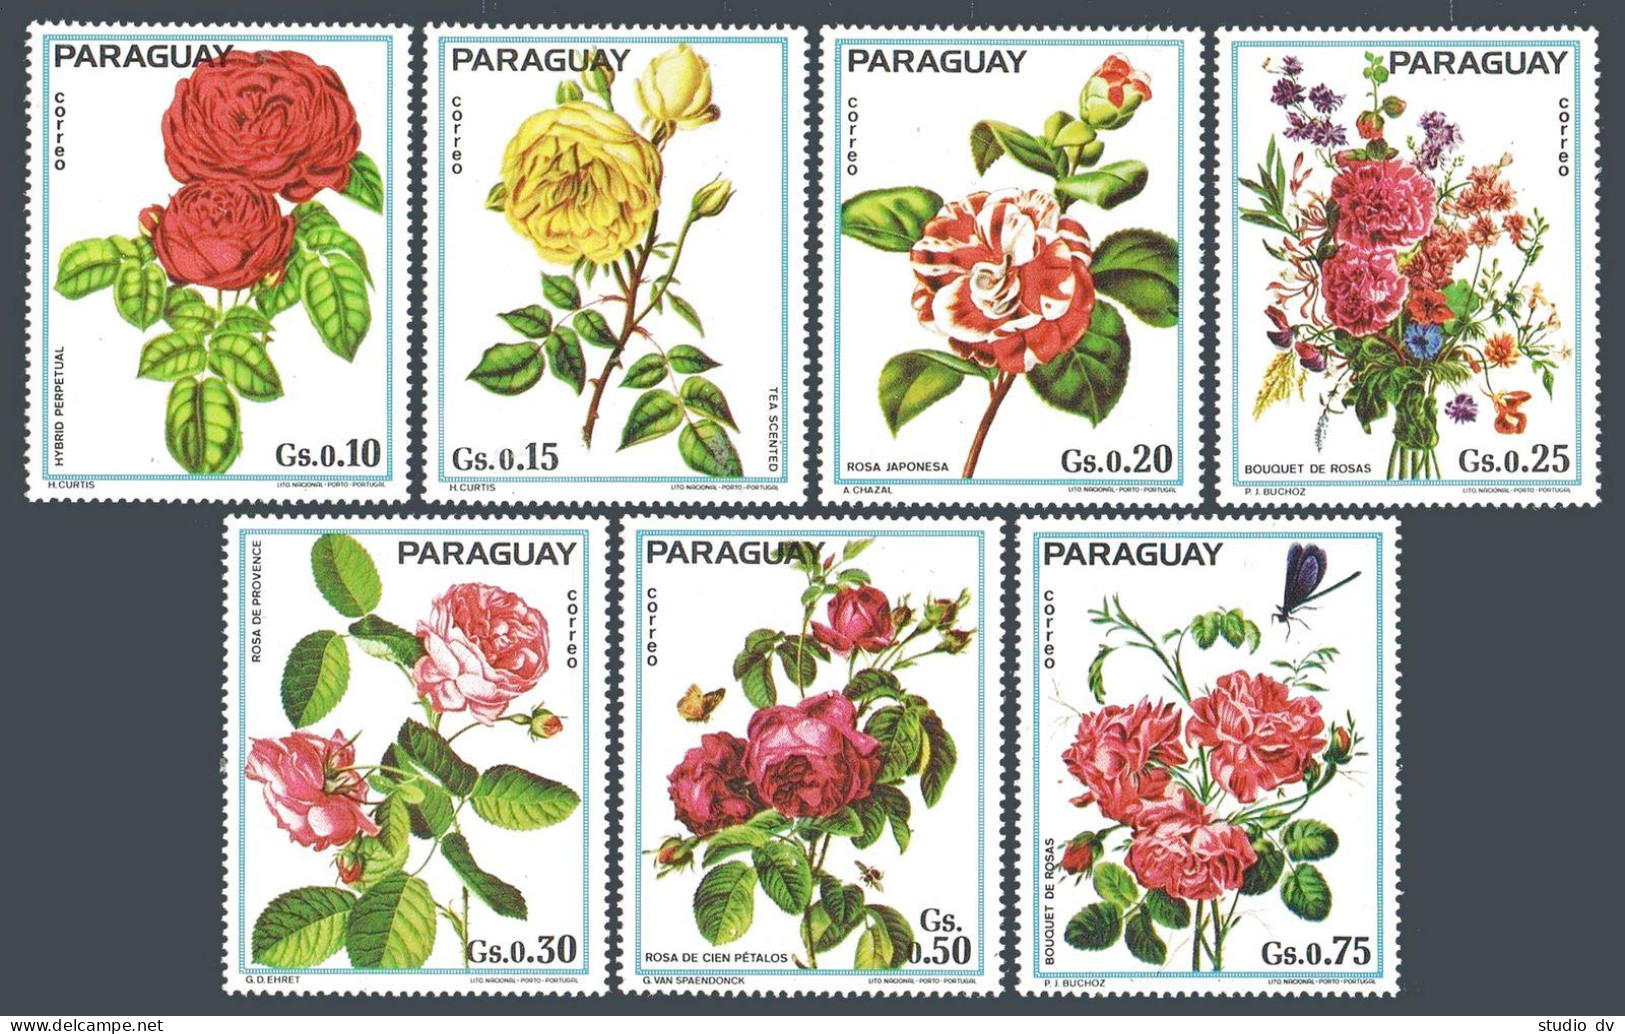 Paraguay 1532a-1532g, MNH. Michel 2537-2543. Roses 1974. Dragonfly. - Paraguay